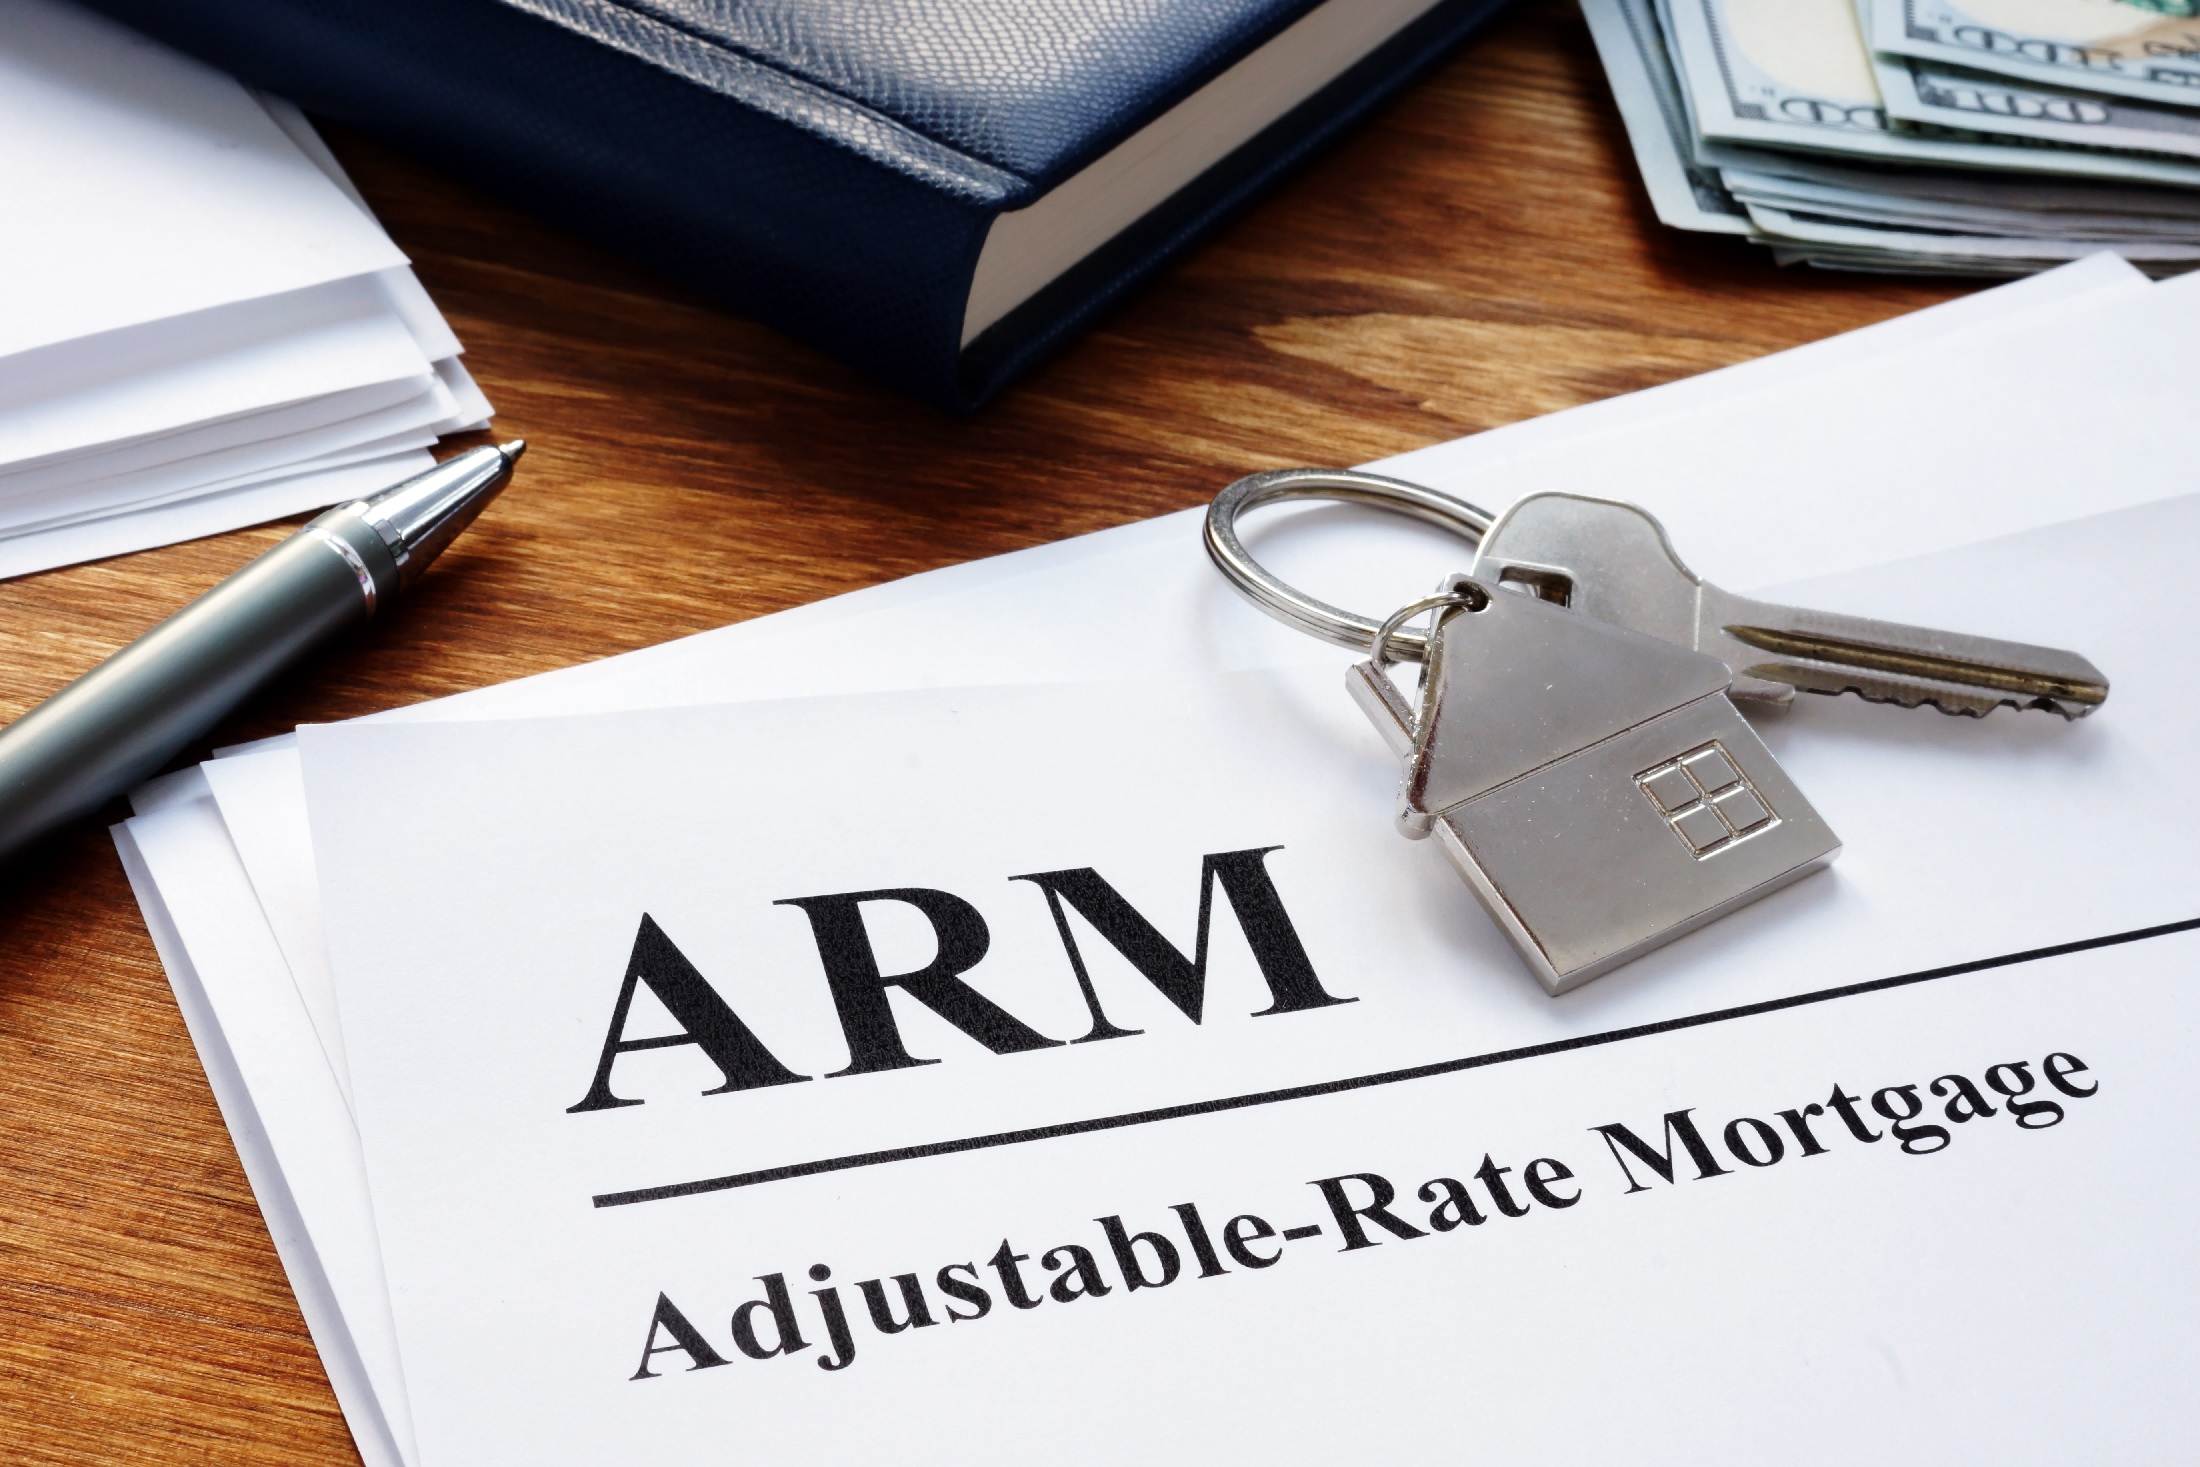 ARM at Standard Mortgage